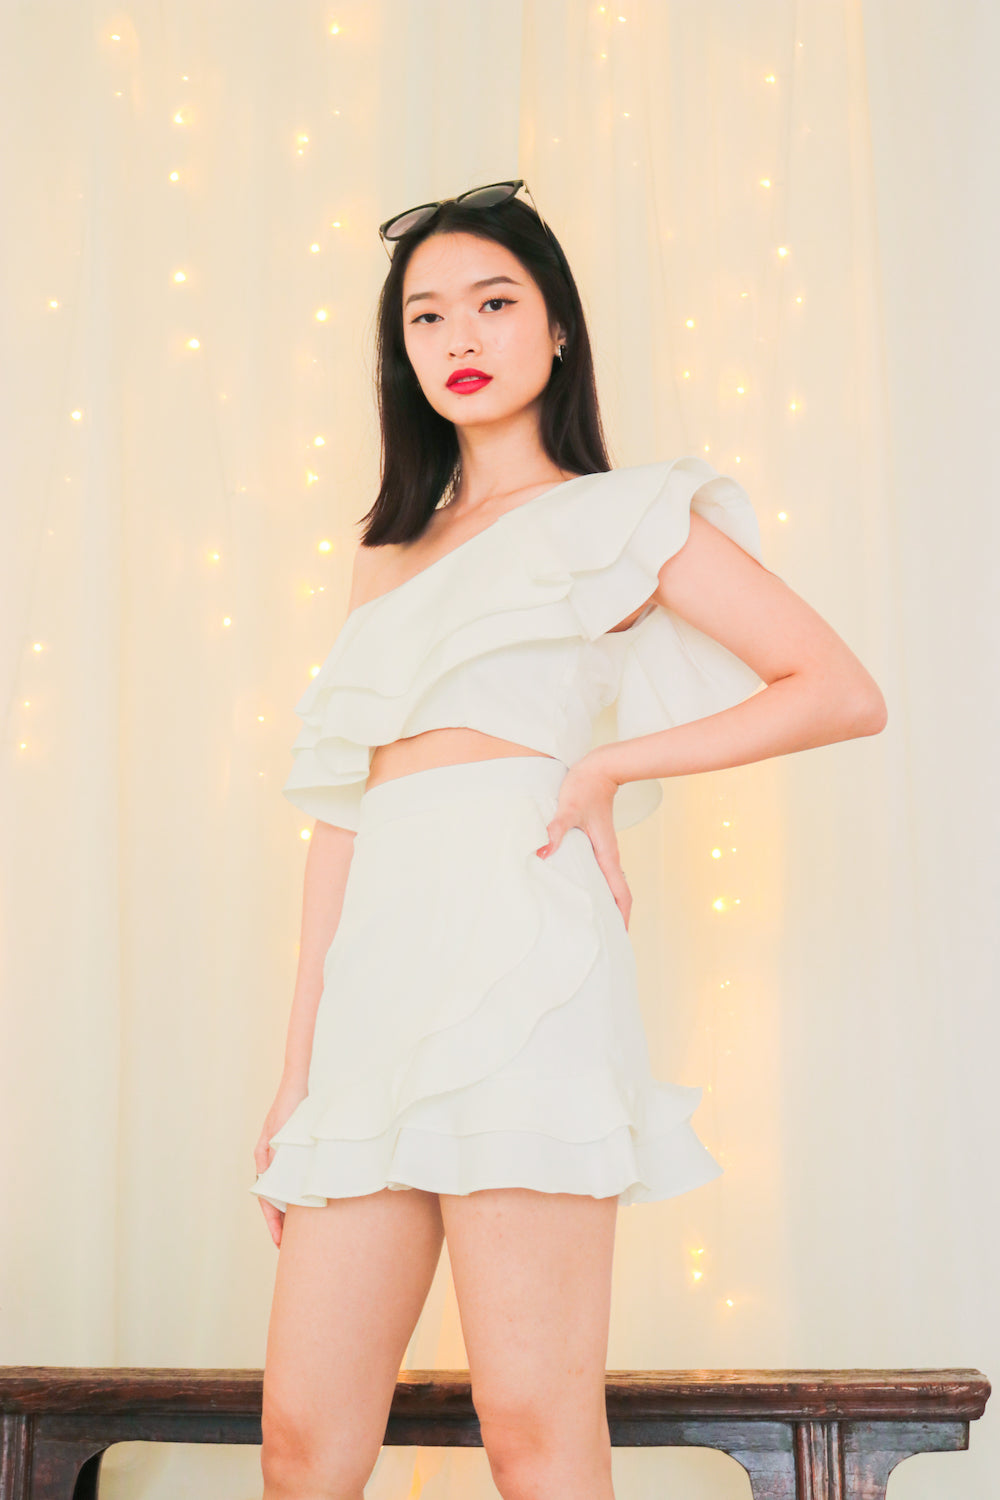 * PREMIUM * - Celeslia Ruffles Toga Top in White - Self Manufactured by LBRLABEL only